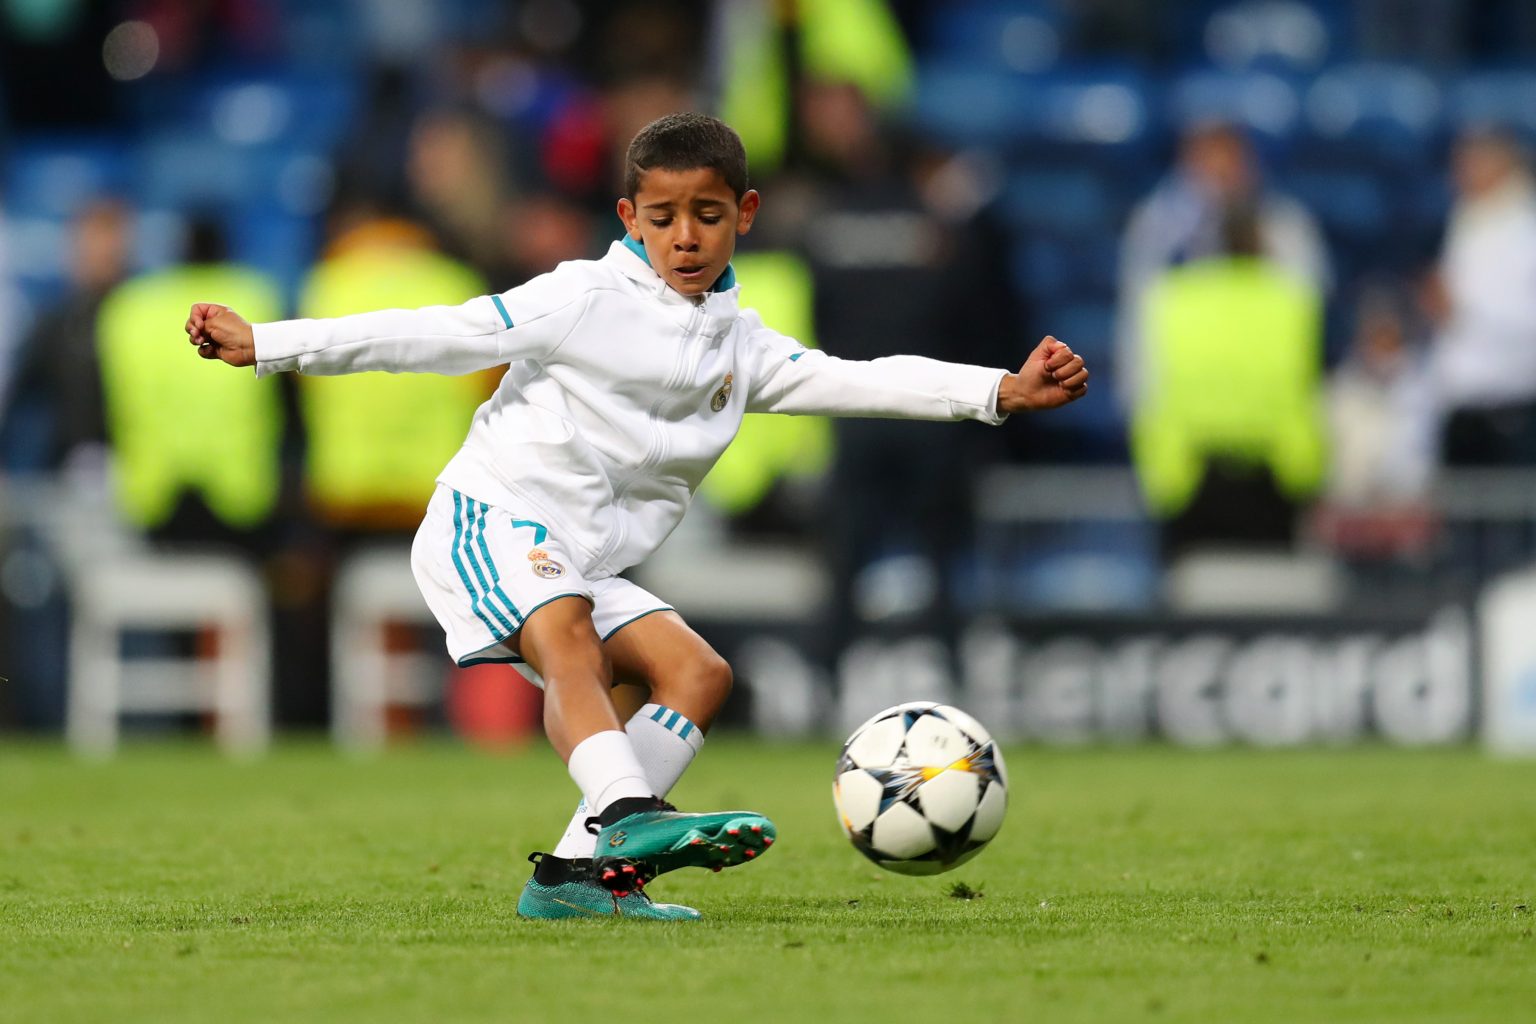 Real Madrid sign Cristiano Ronaldo’s son for the youth academy – report - Bóng Đá